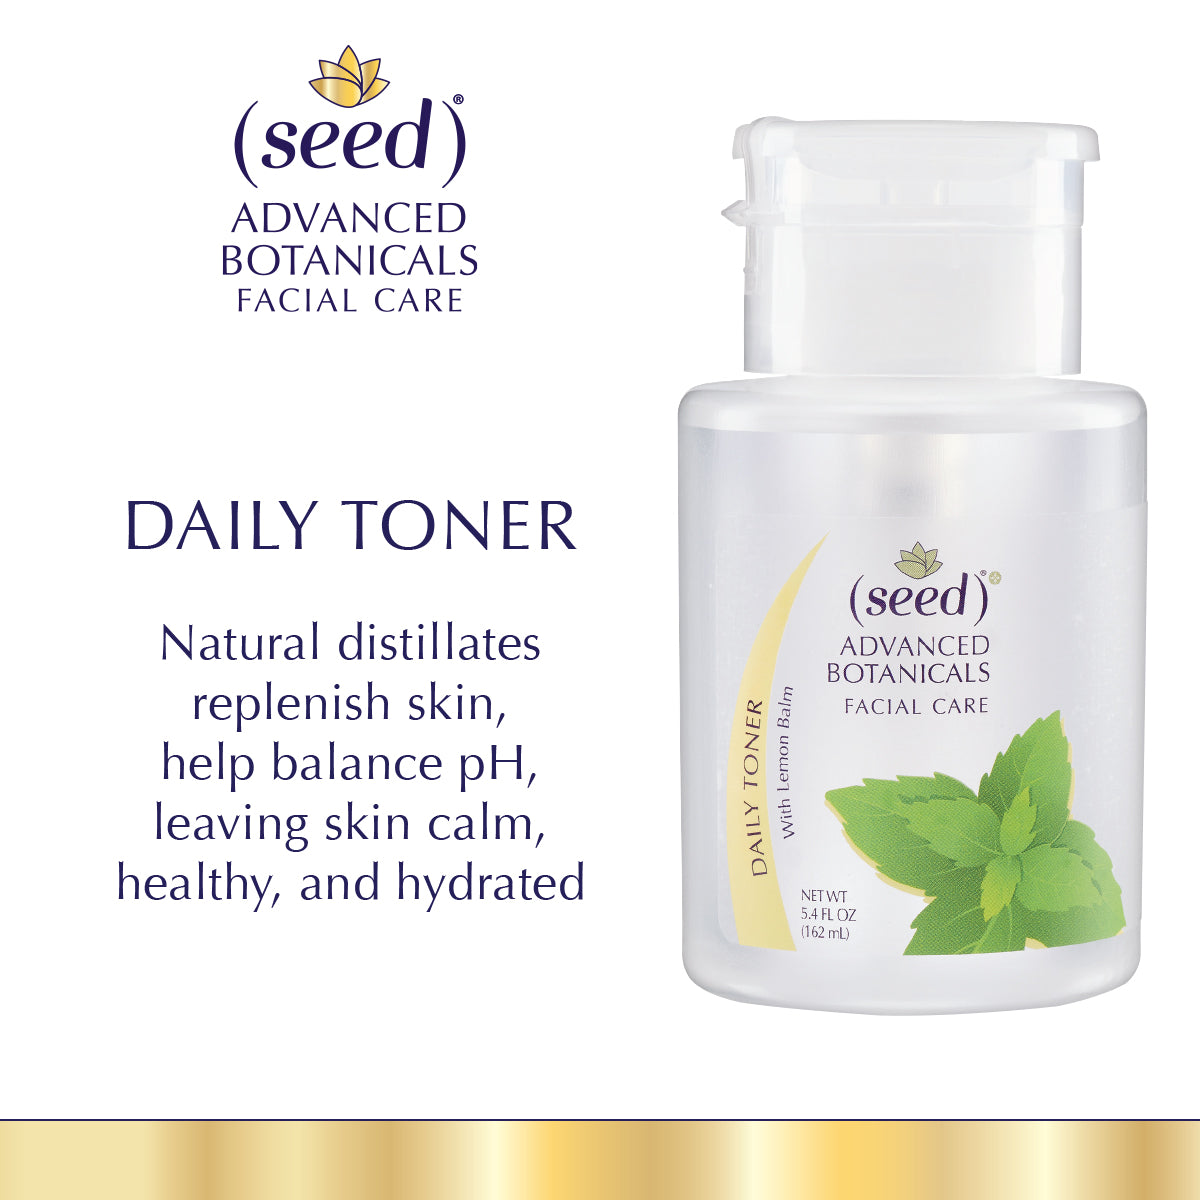 Seed Advanced Botanicals Daily Face Toner Benefits